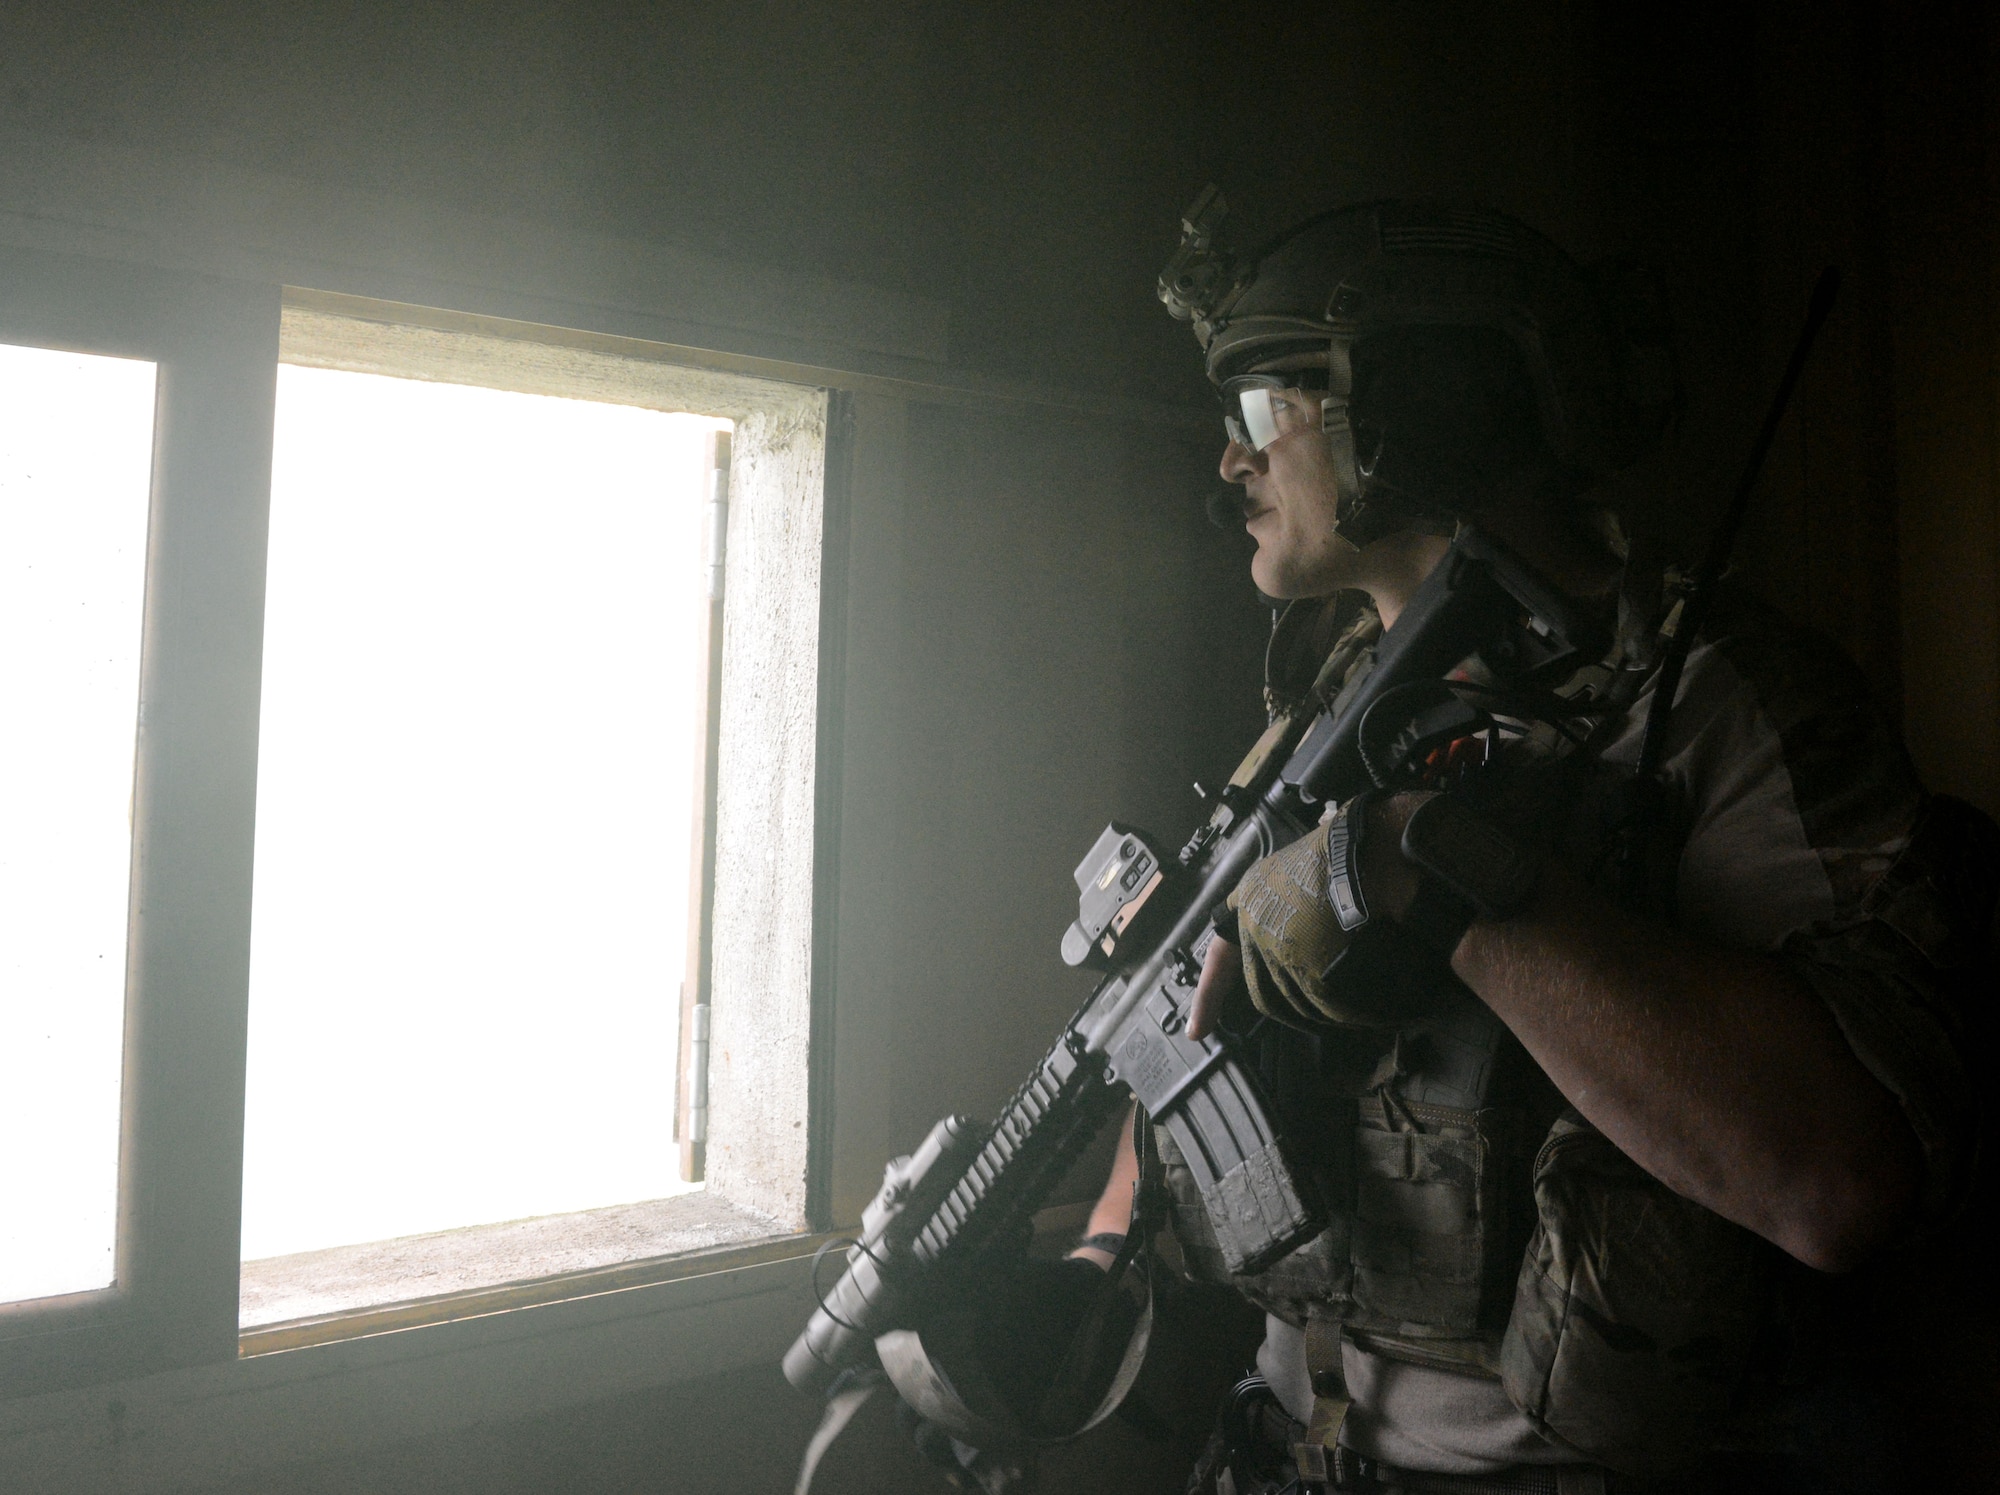 A U.S. Air Force combat controller guards a window in a simulated village under attack during a training exercise Oct. 7, 2014, at Stanford Training Area near Thetford, England. Combat controllers call in air combat power while operating with special operations forces in austere combat environments. The exercise was designed to familiarize special tactics Airmen with combat scenarios preparing for real-world incidents. (U.S. Air Force photo/Senior Airman Kate Maurer/Released)